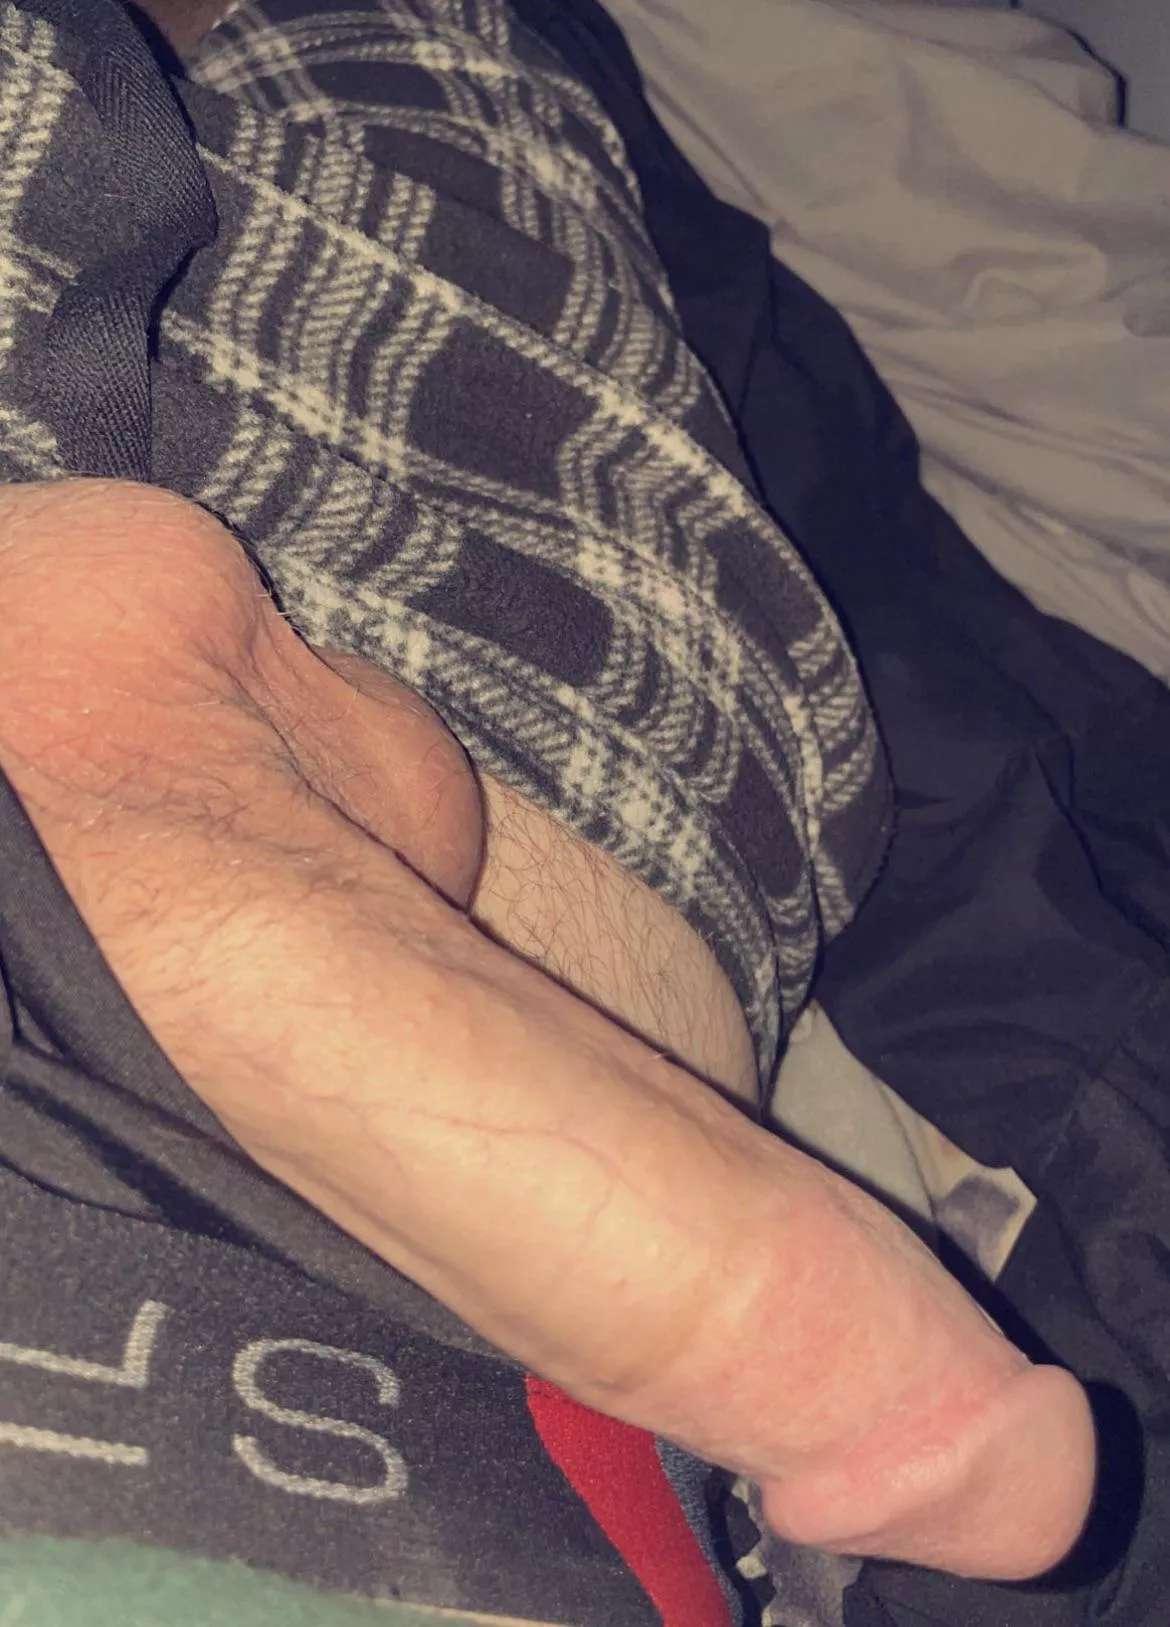 19 m Winnipeg Manitoba 🇨🇦 about to jerk off anyone wanna join me hmu, be close to my age pleaseeeee!! Hung+++ cute+++ snap kddavi20 nudes GaySnapchatImages NUDE-PICS pic